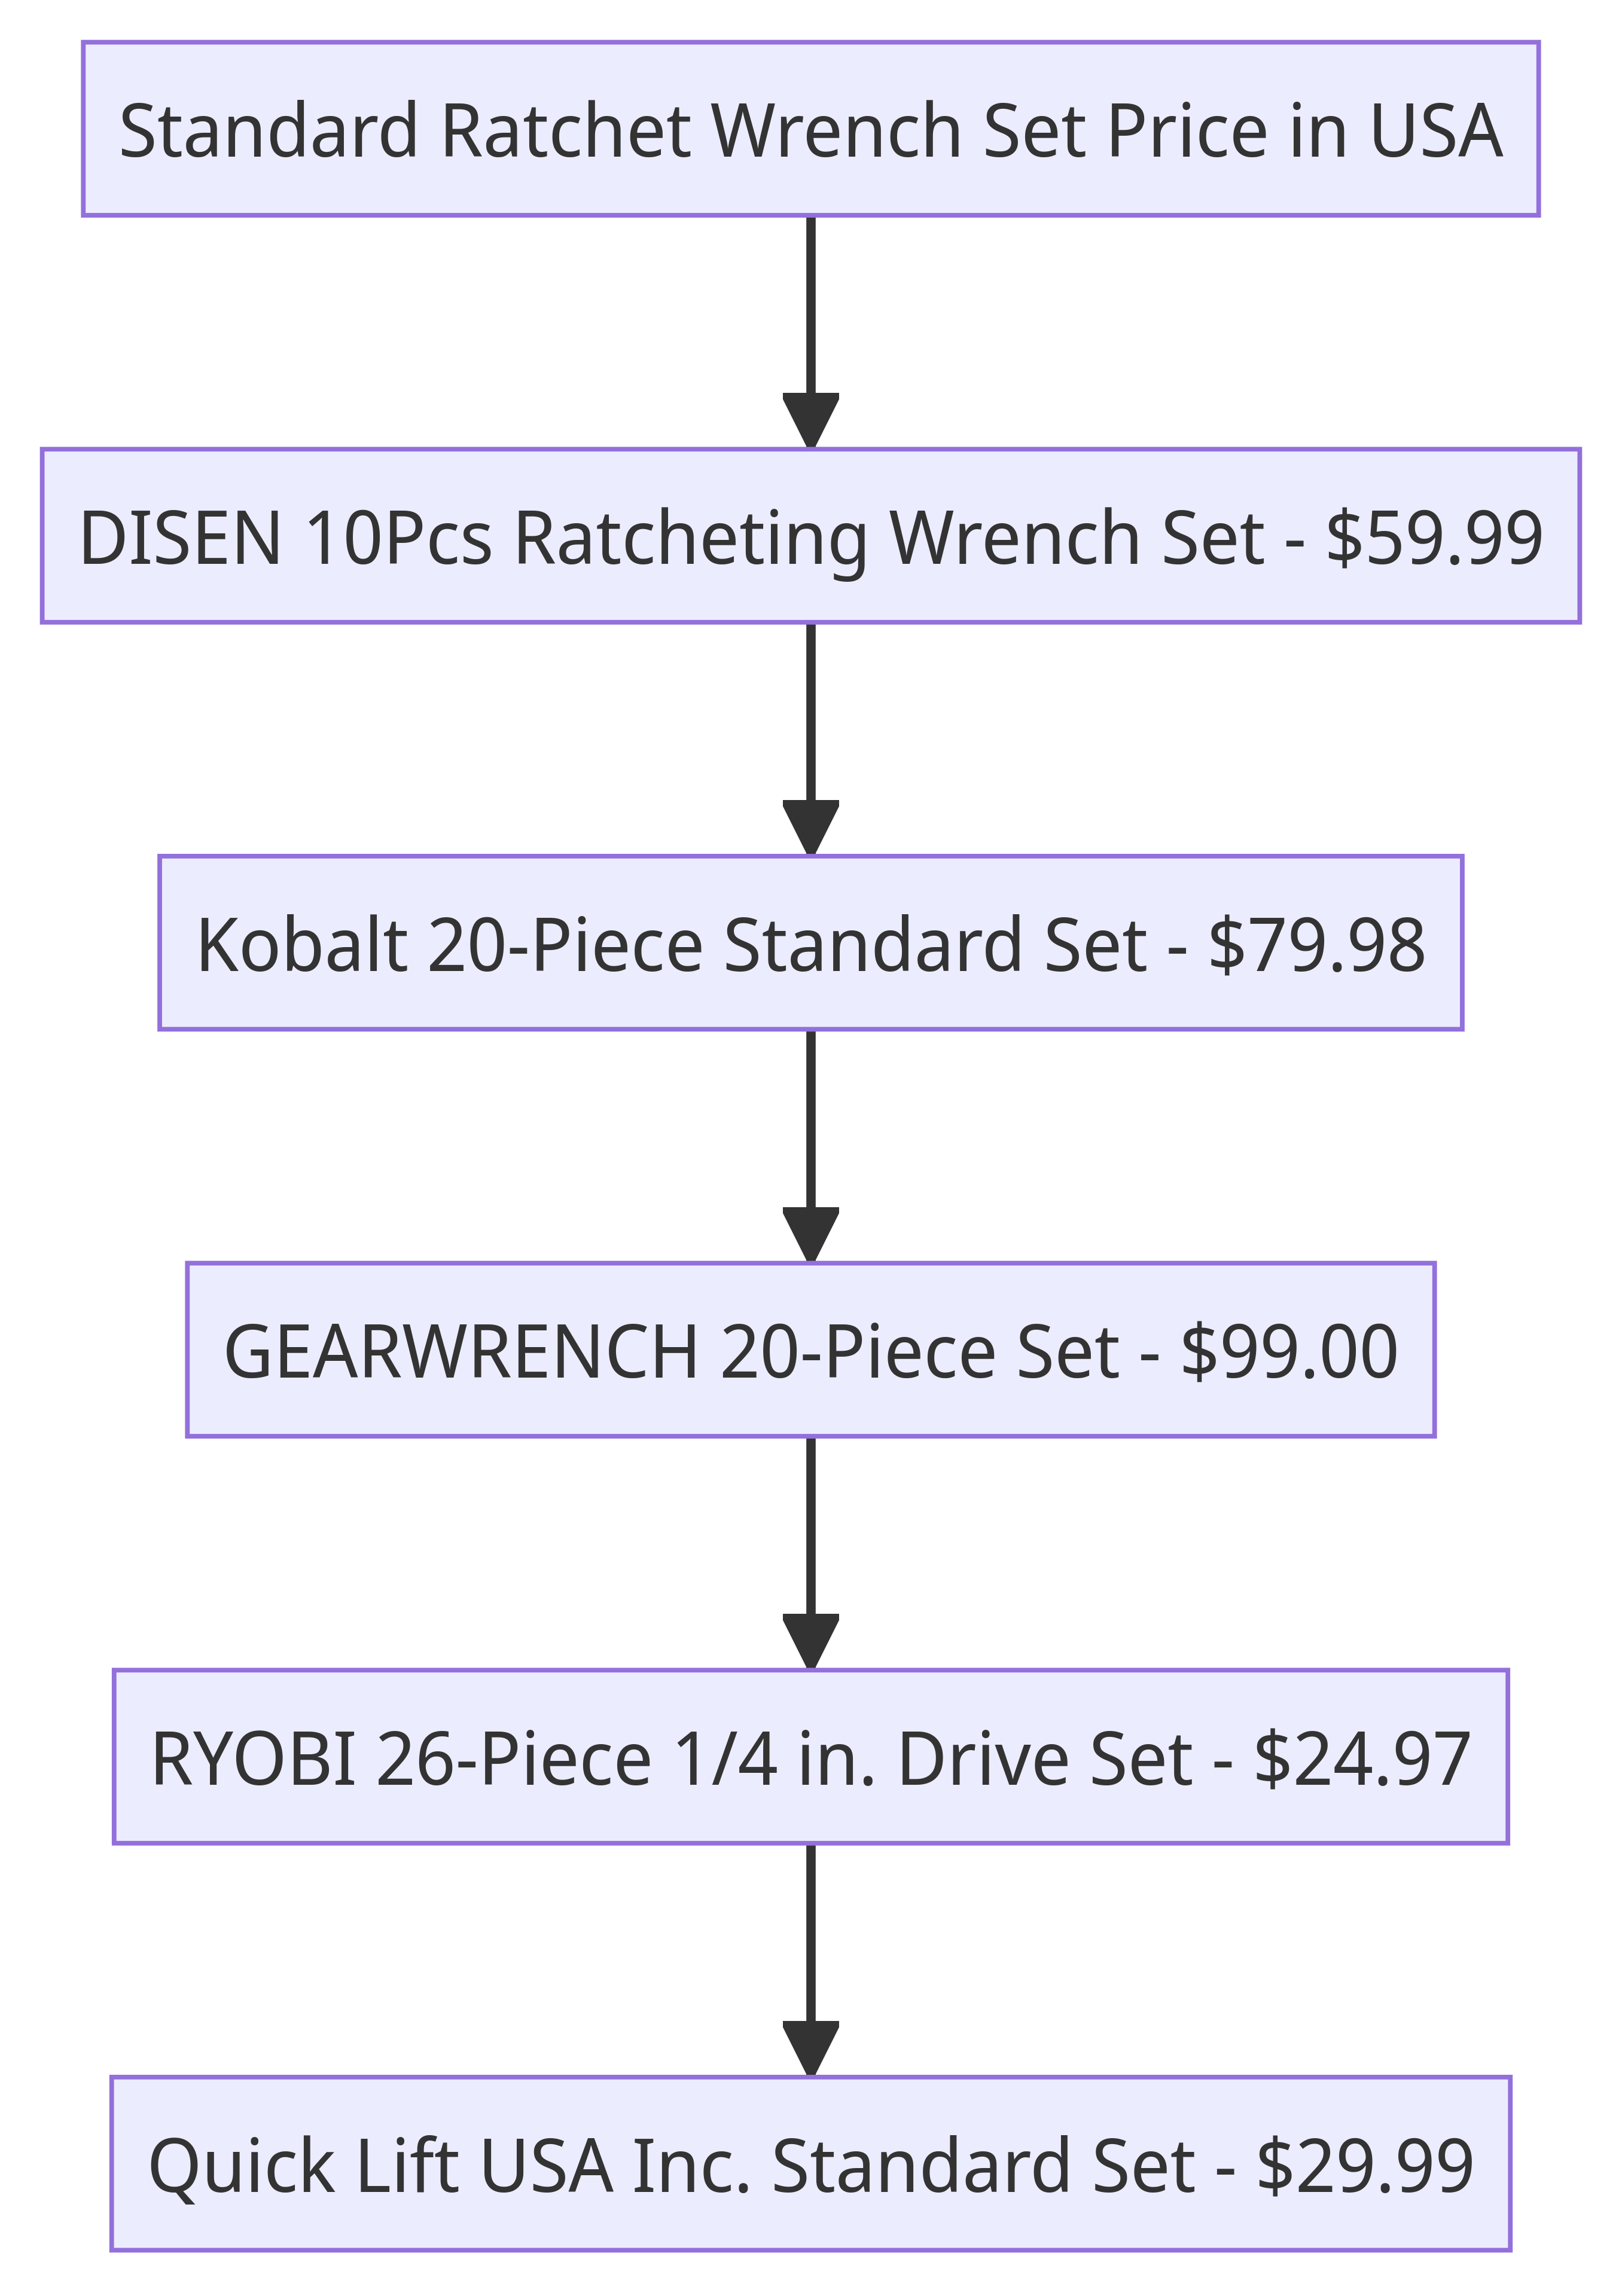 Flow Chart of Standard Ratchet Wrench Set Prices